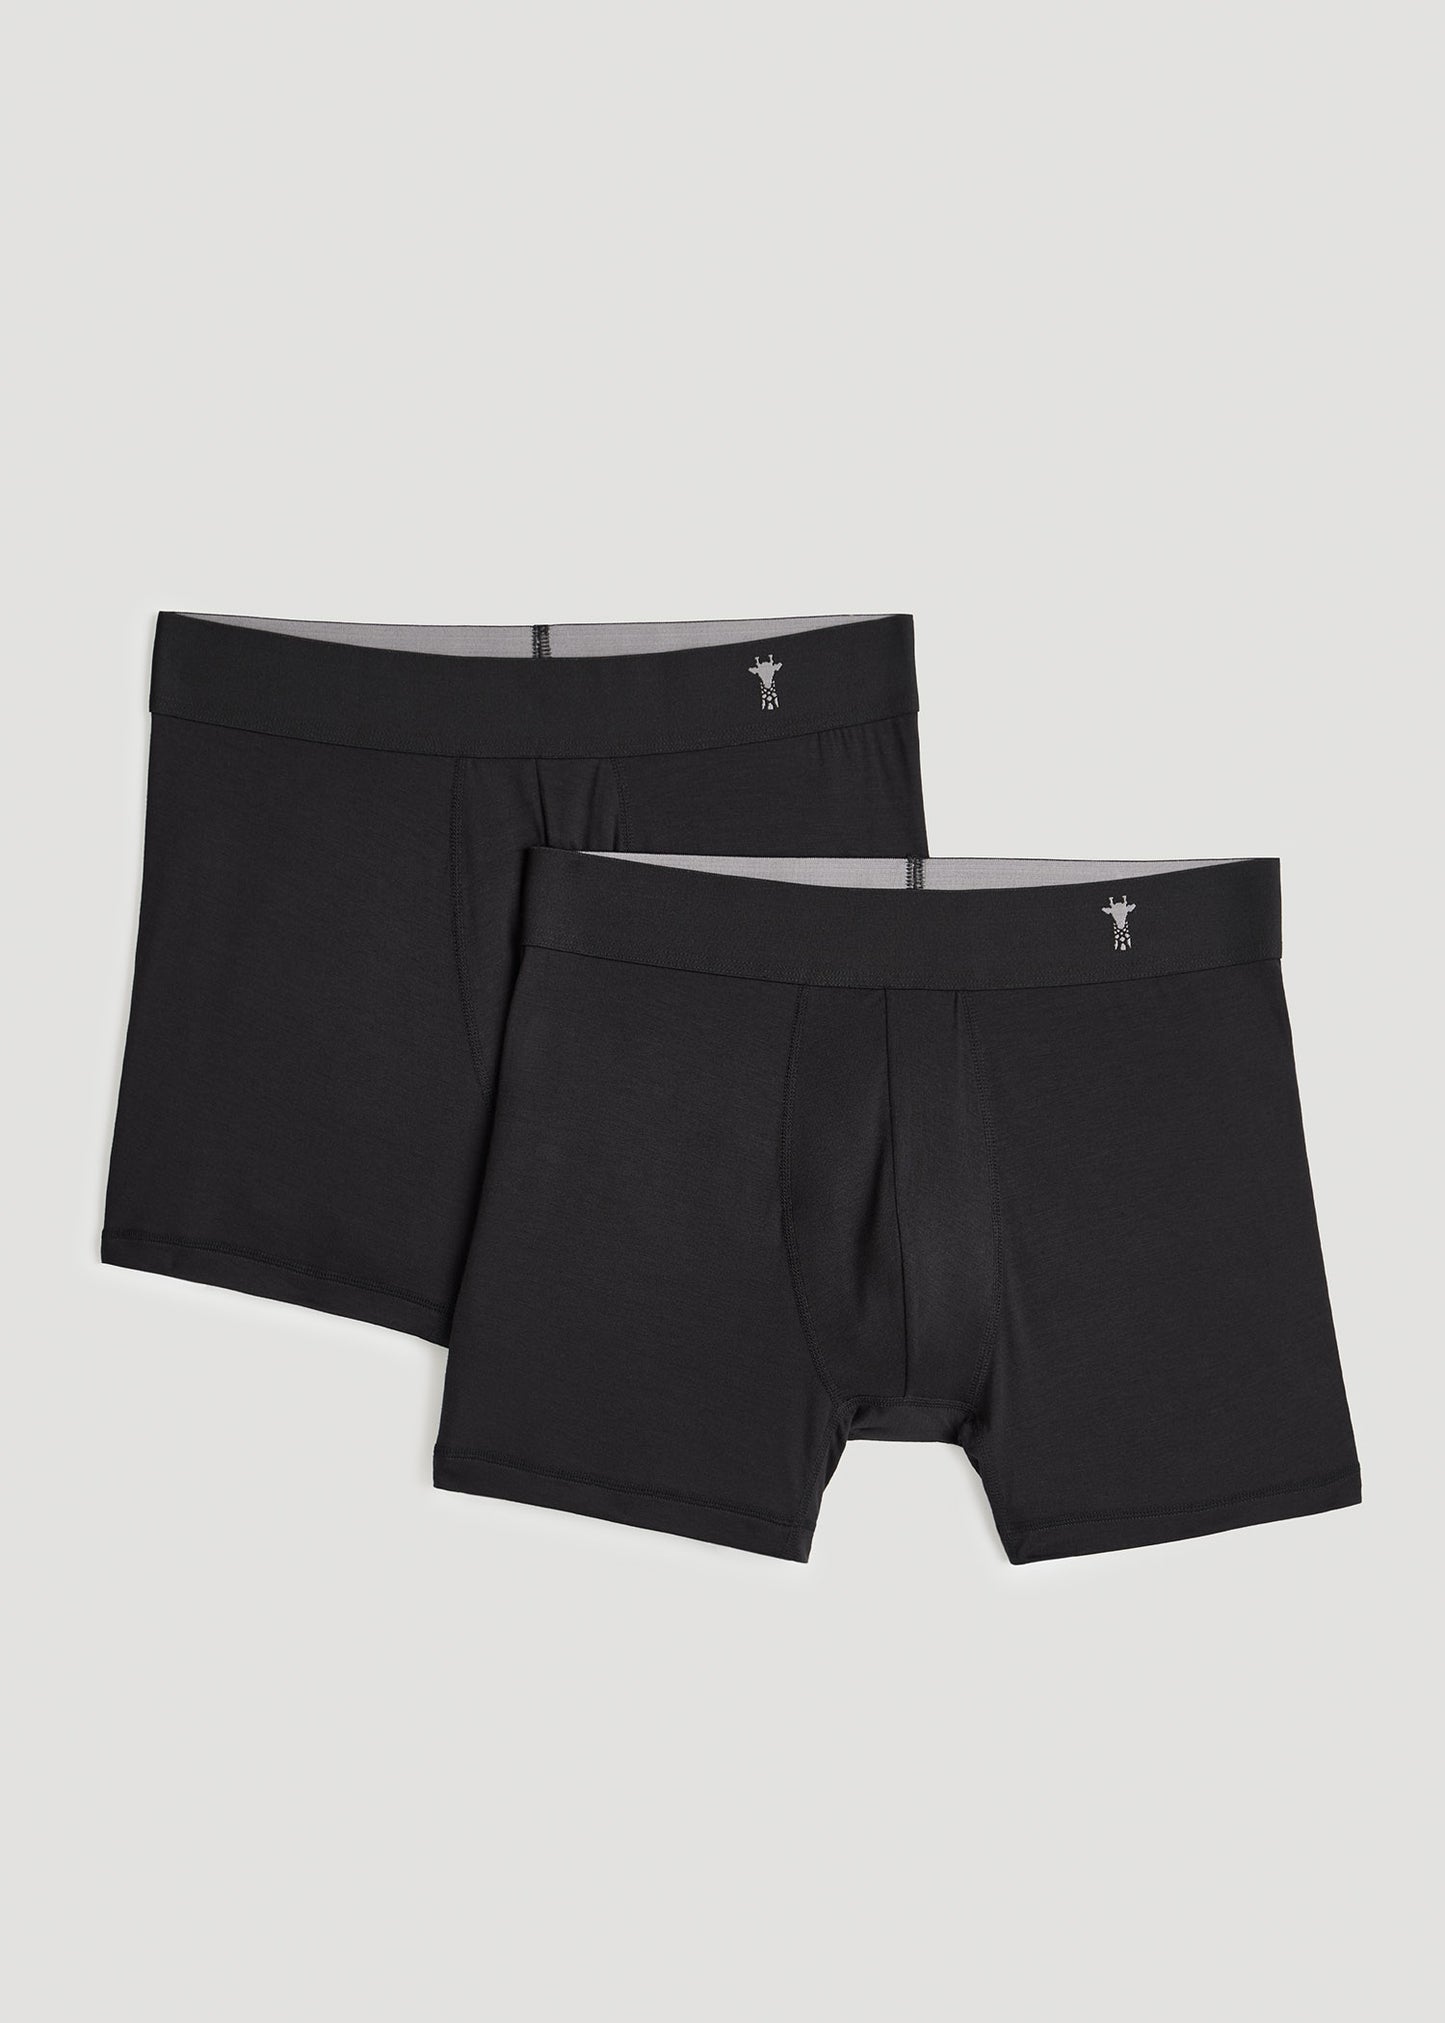 Micro Modal Extra-Long Boxer Briefs in Black (2-Pack)